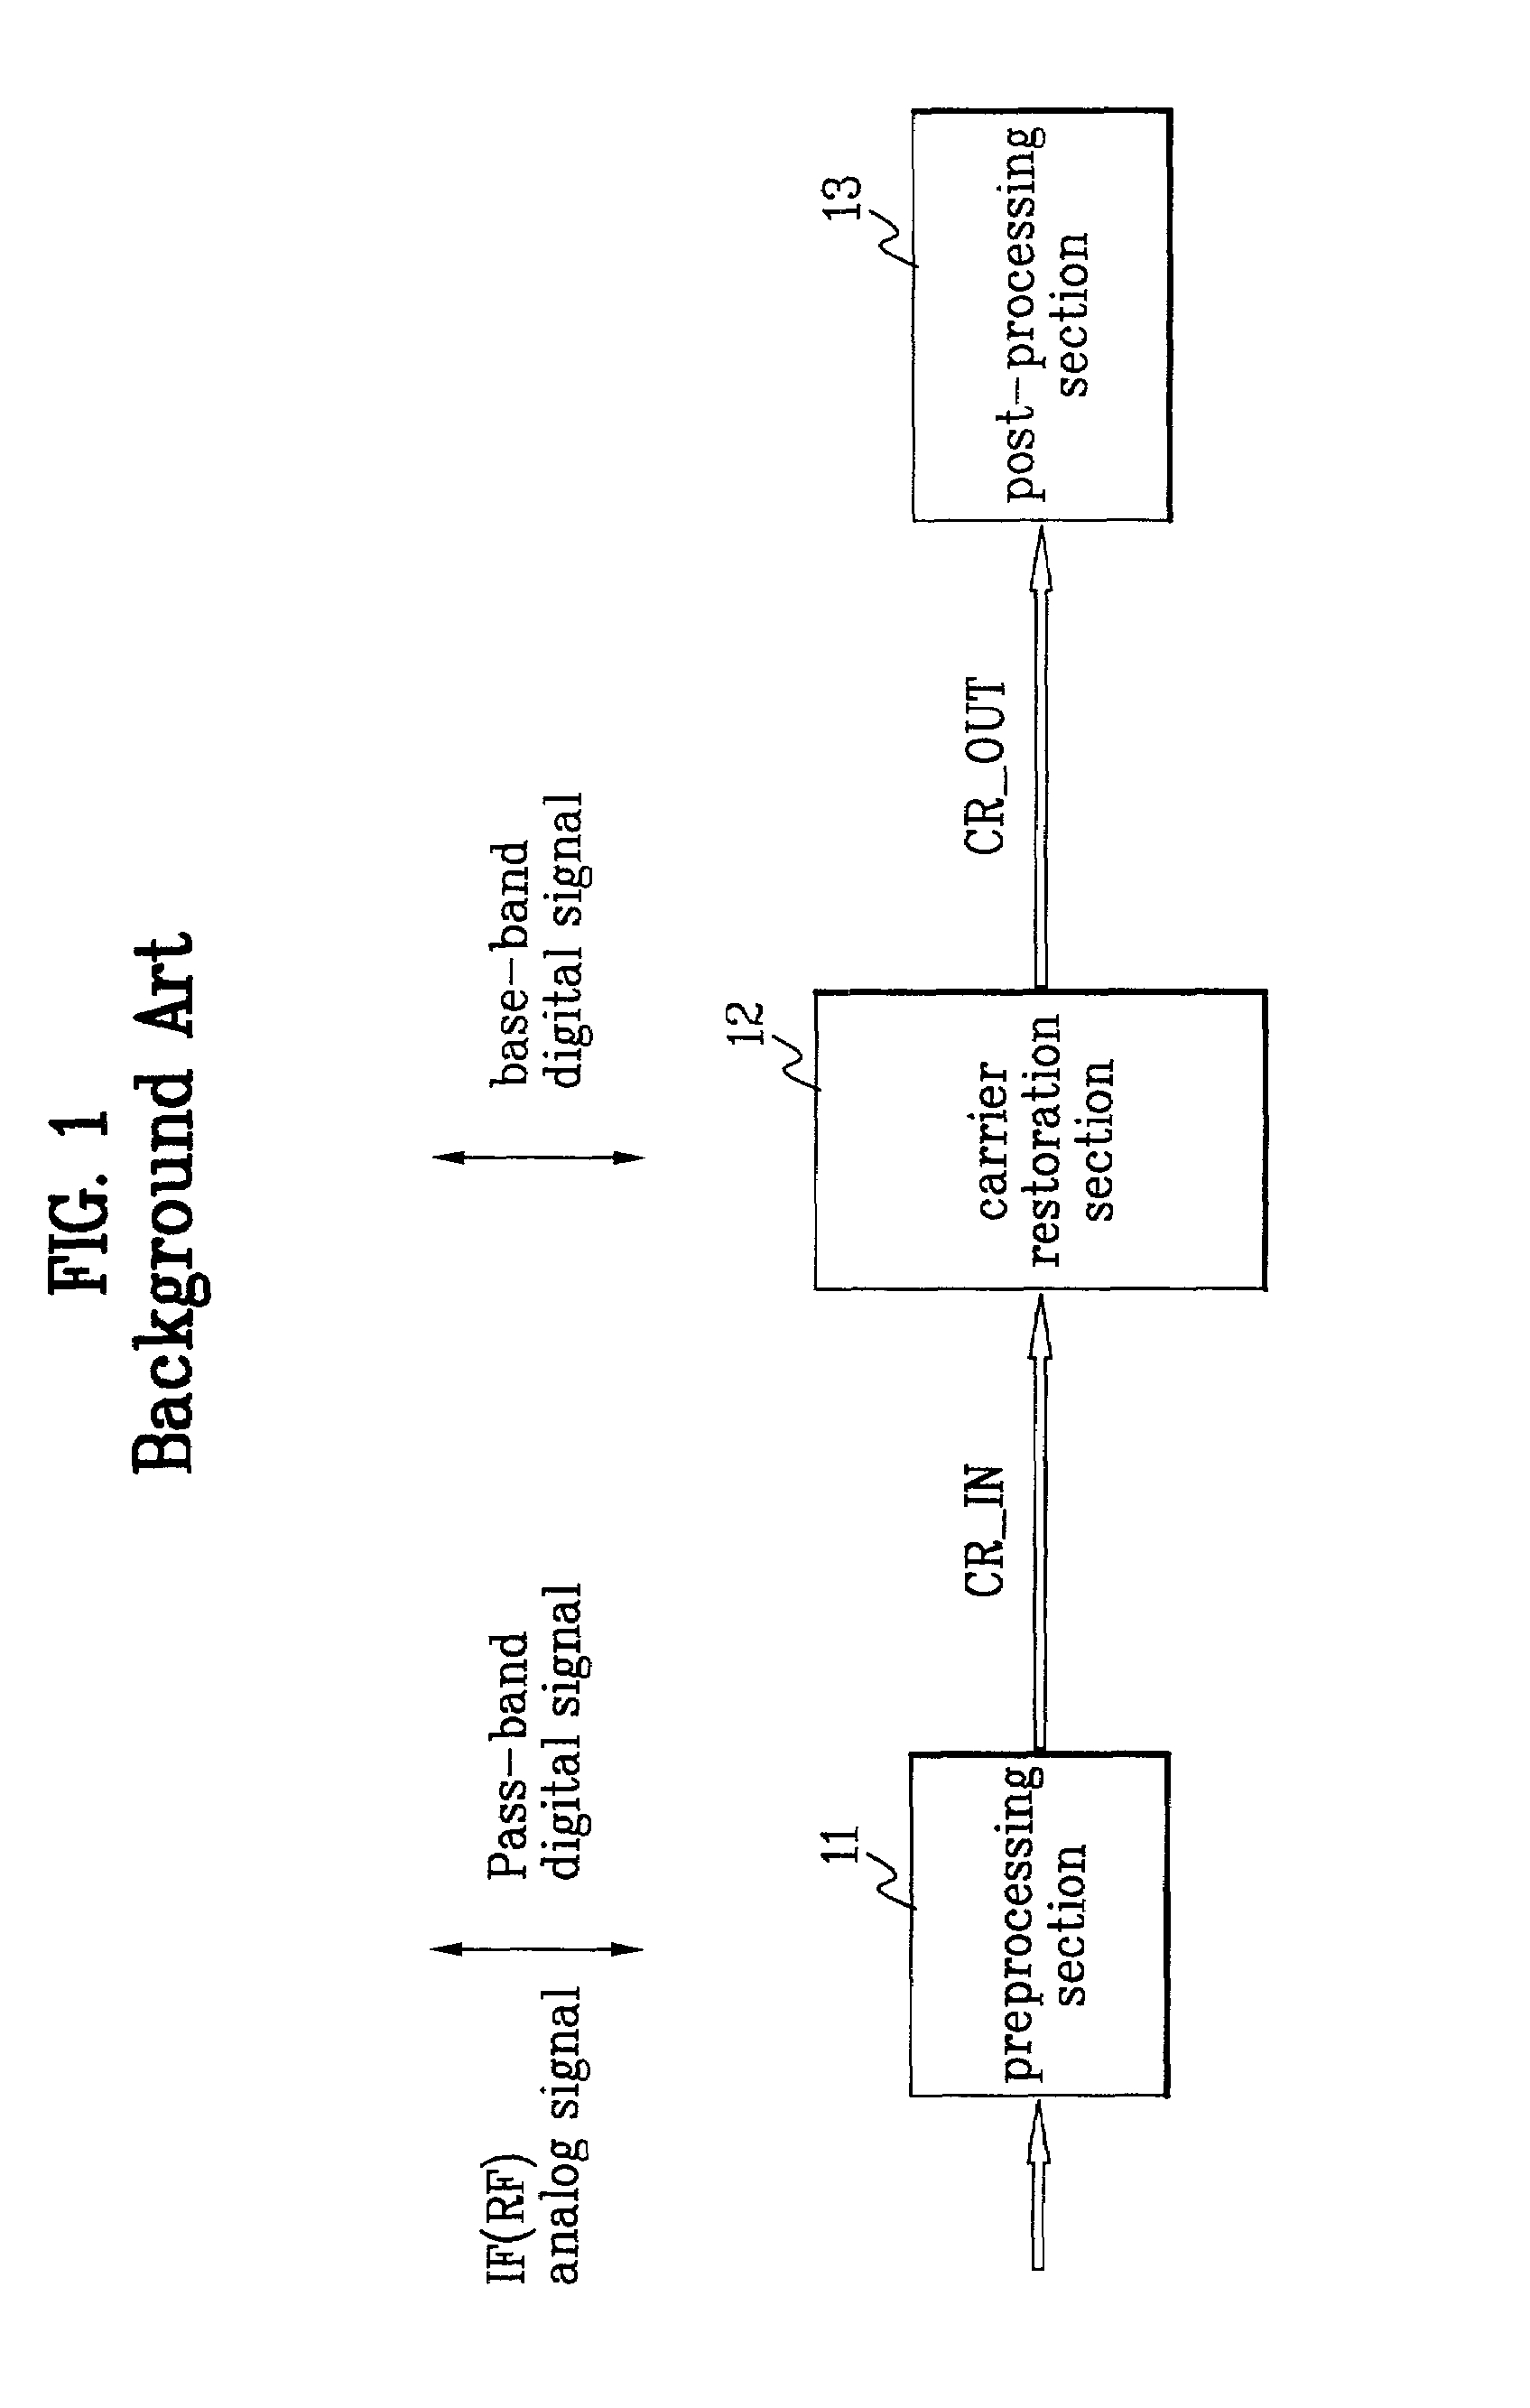 Carrier restoration apparatus and method